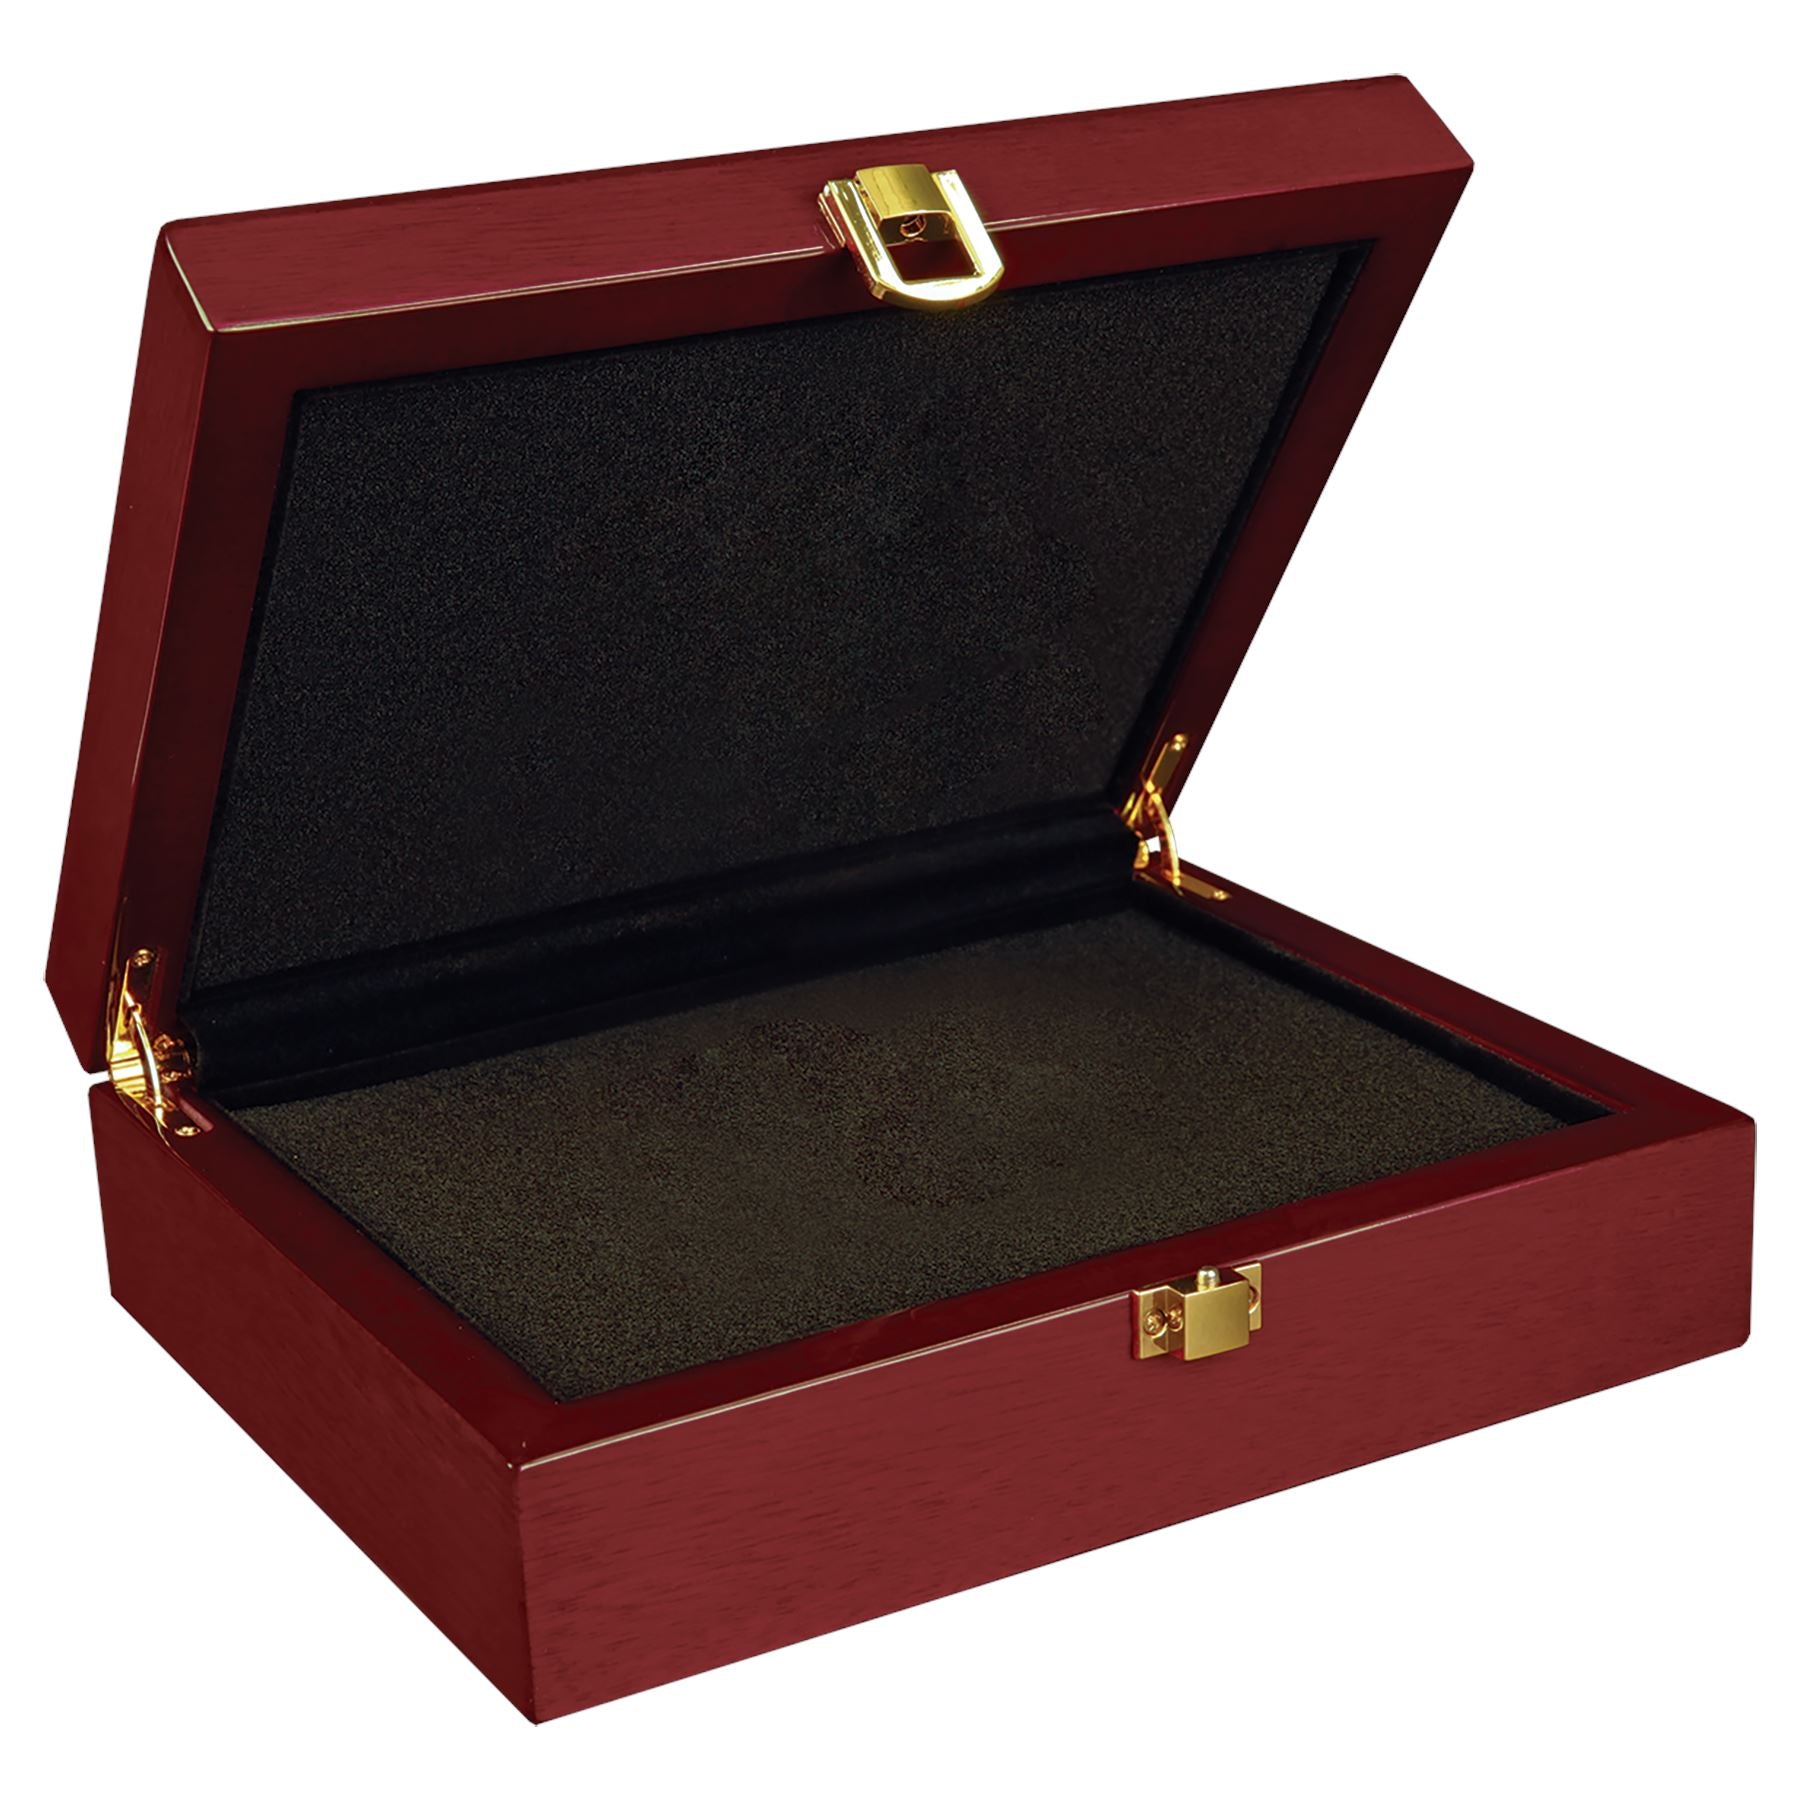 Rosewood Piano Finish Gift Box, 12 1/4" x 8 1/4" x 3, Laser Engraved Gift Box Craftworks NW 